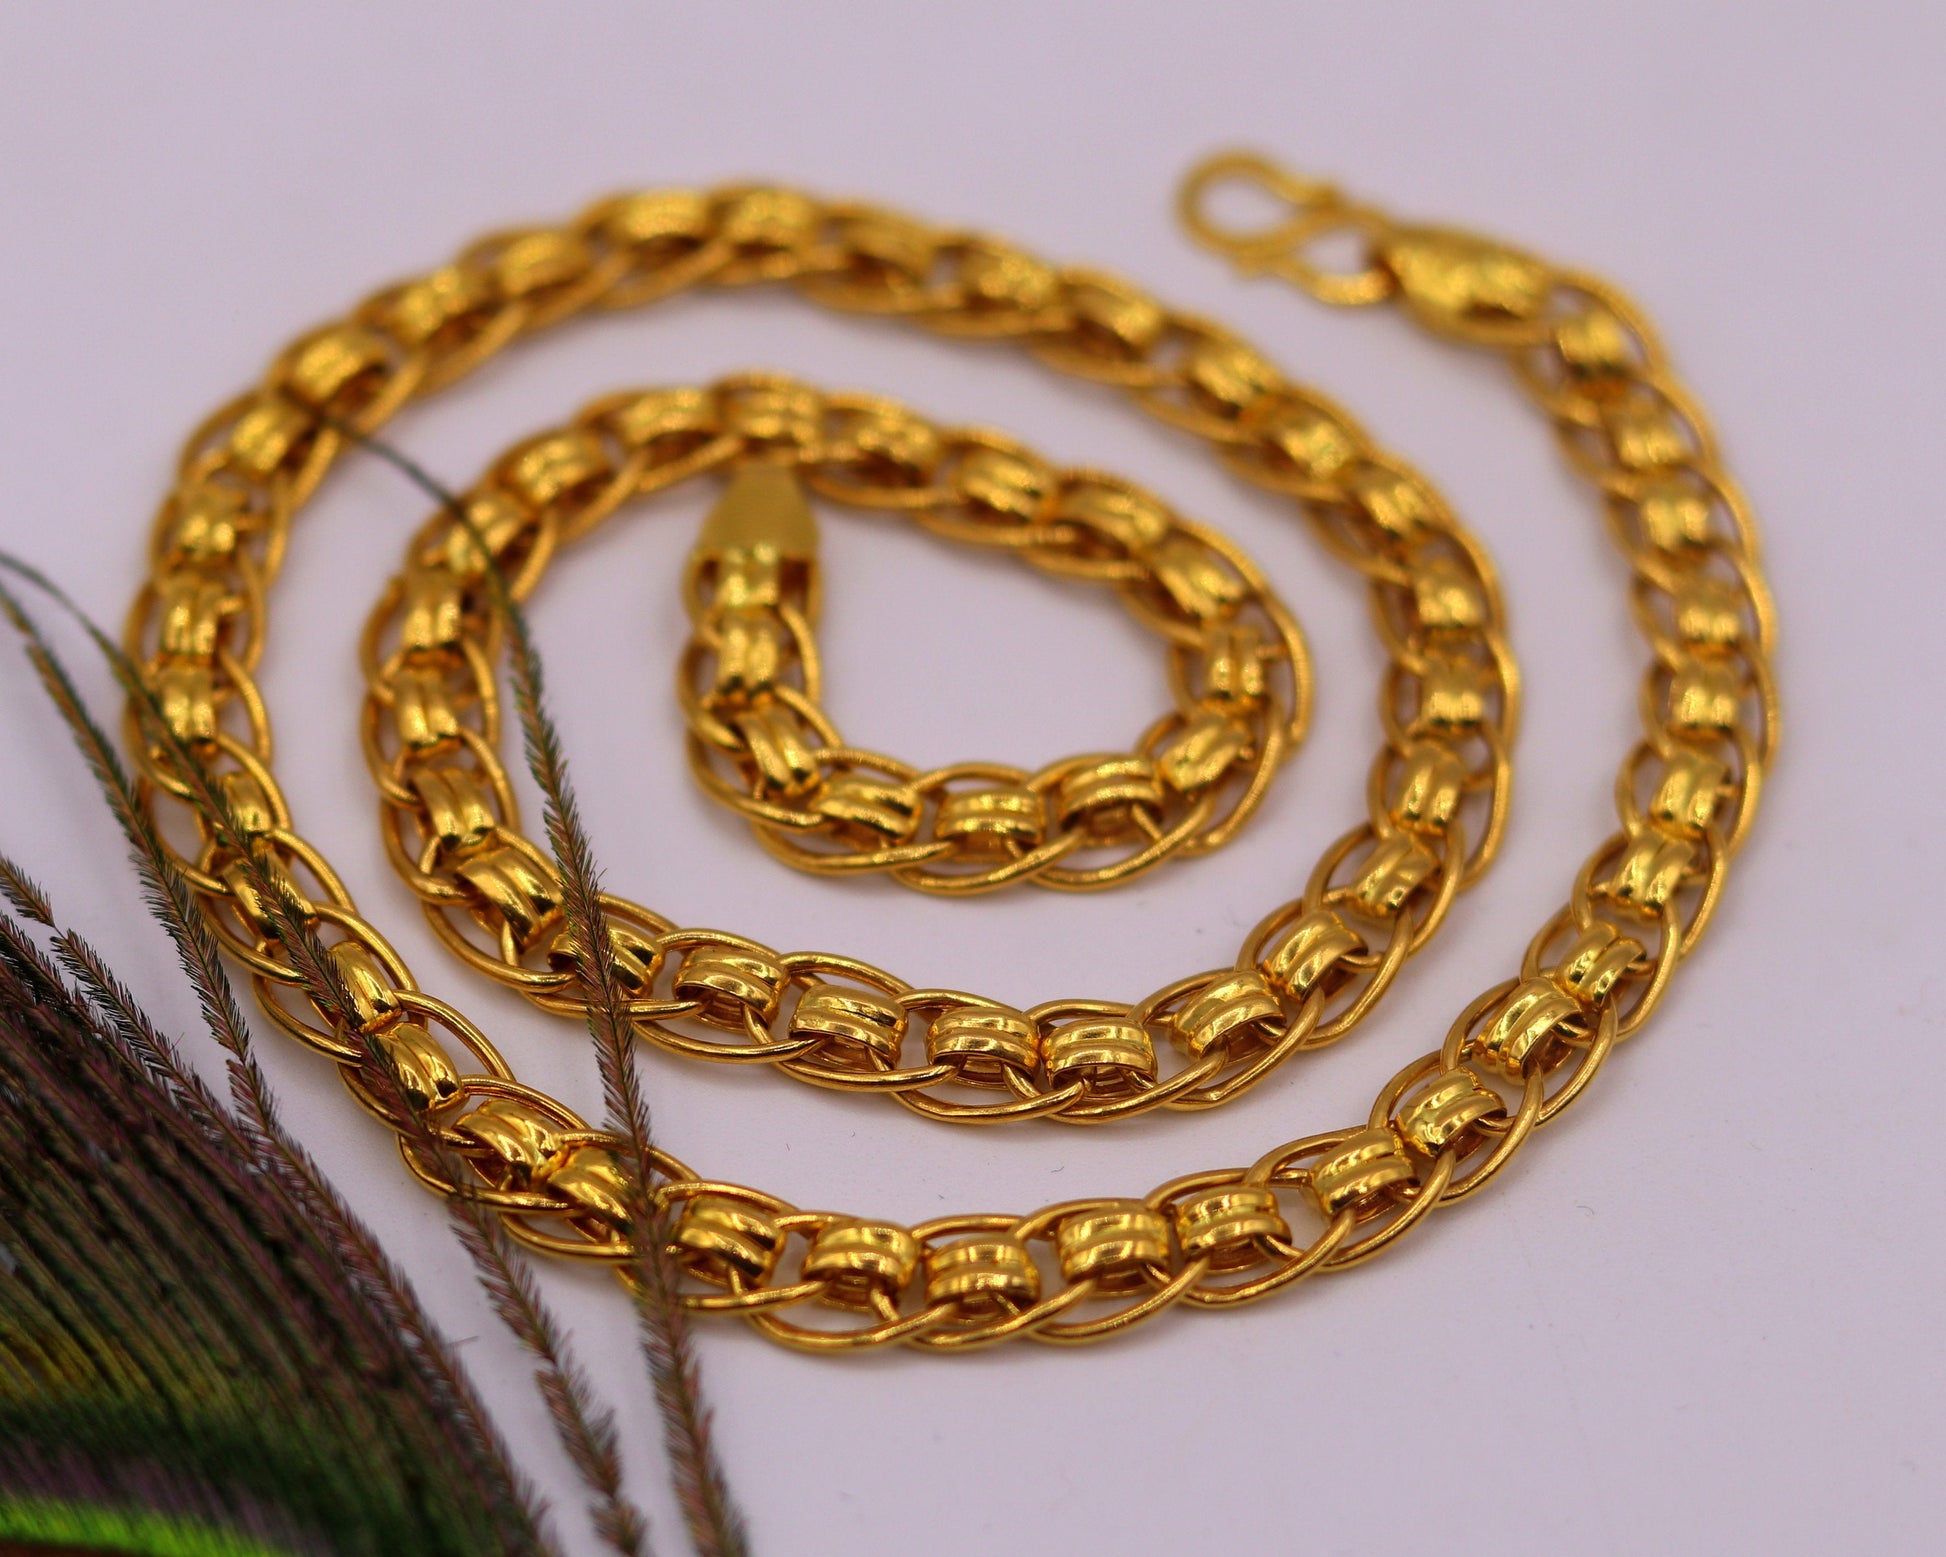 22k certified yellow gold handmade gorgeous link chain 7 mm 20 inches long chain necklace india jewelry  ch188 - TRIBAL ORNAMENTS